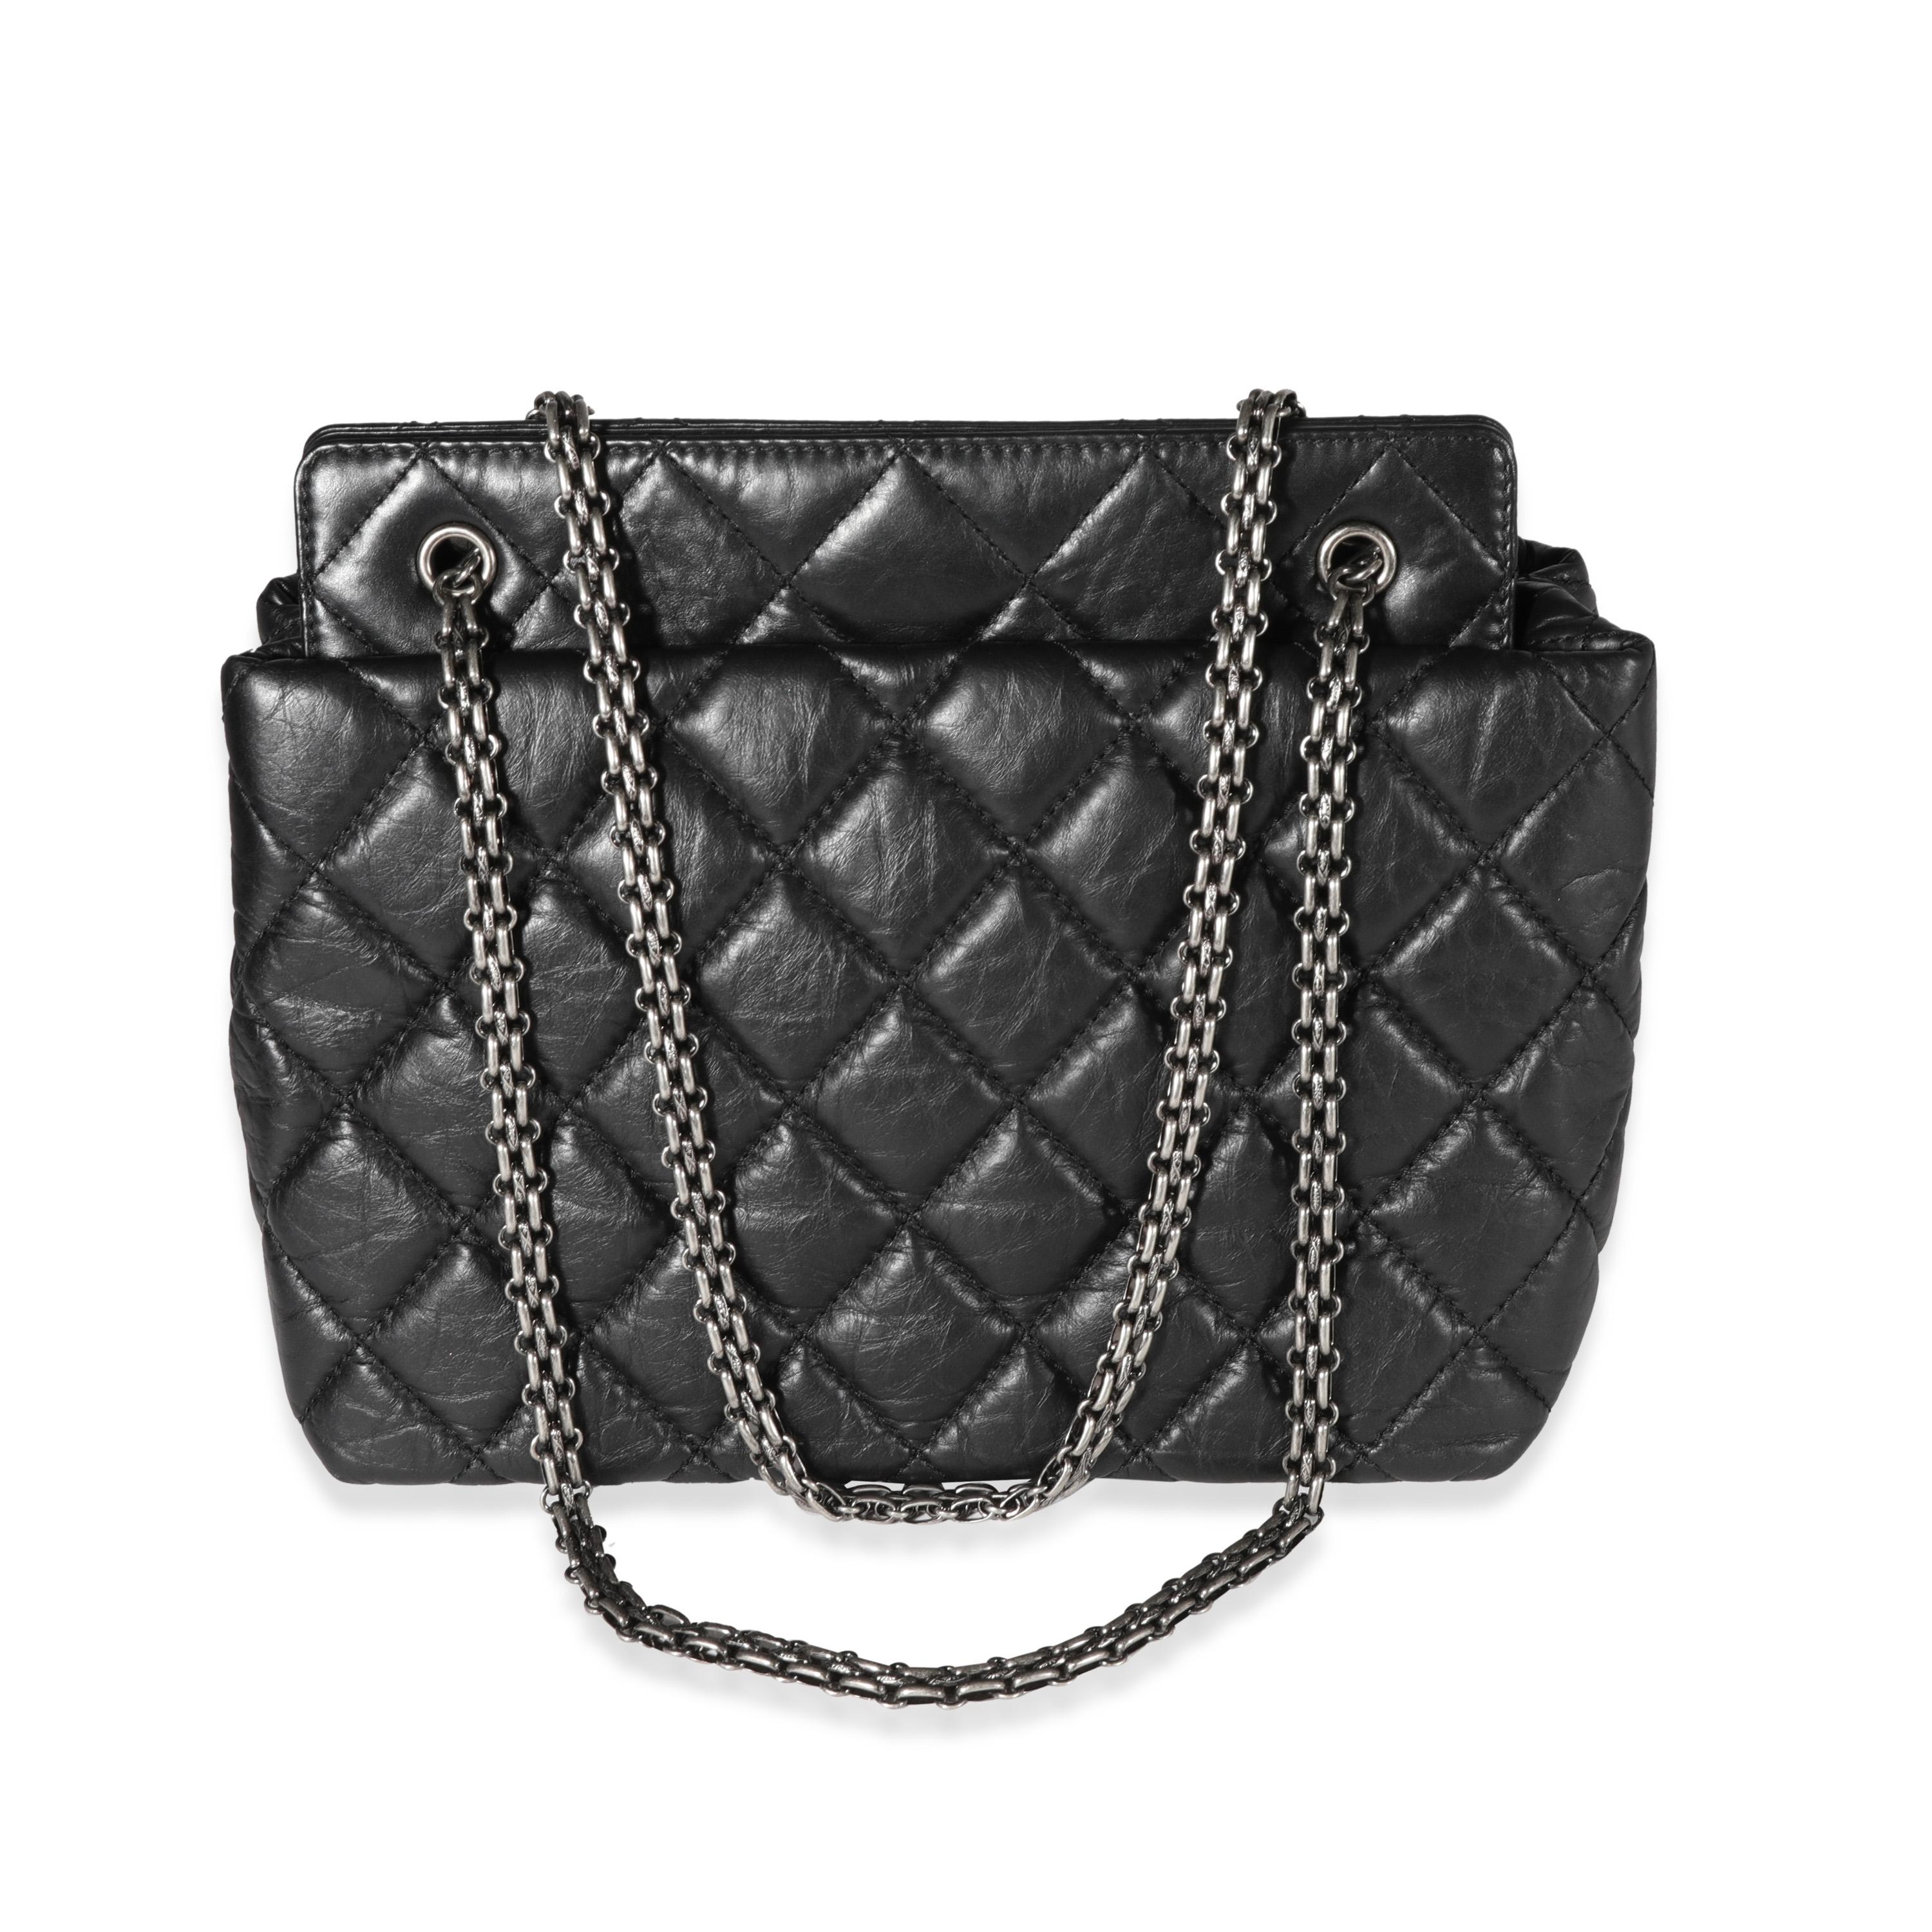 Chanel Black Quilted Aged Calfskin Reissue Shopping Tote In Good Condition For Sale In New York, NY